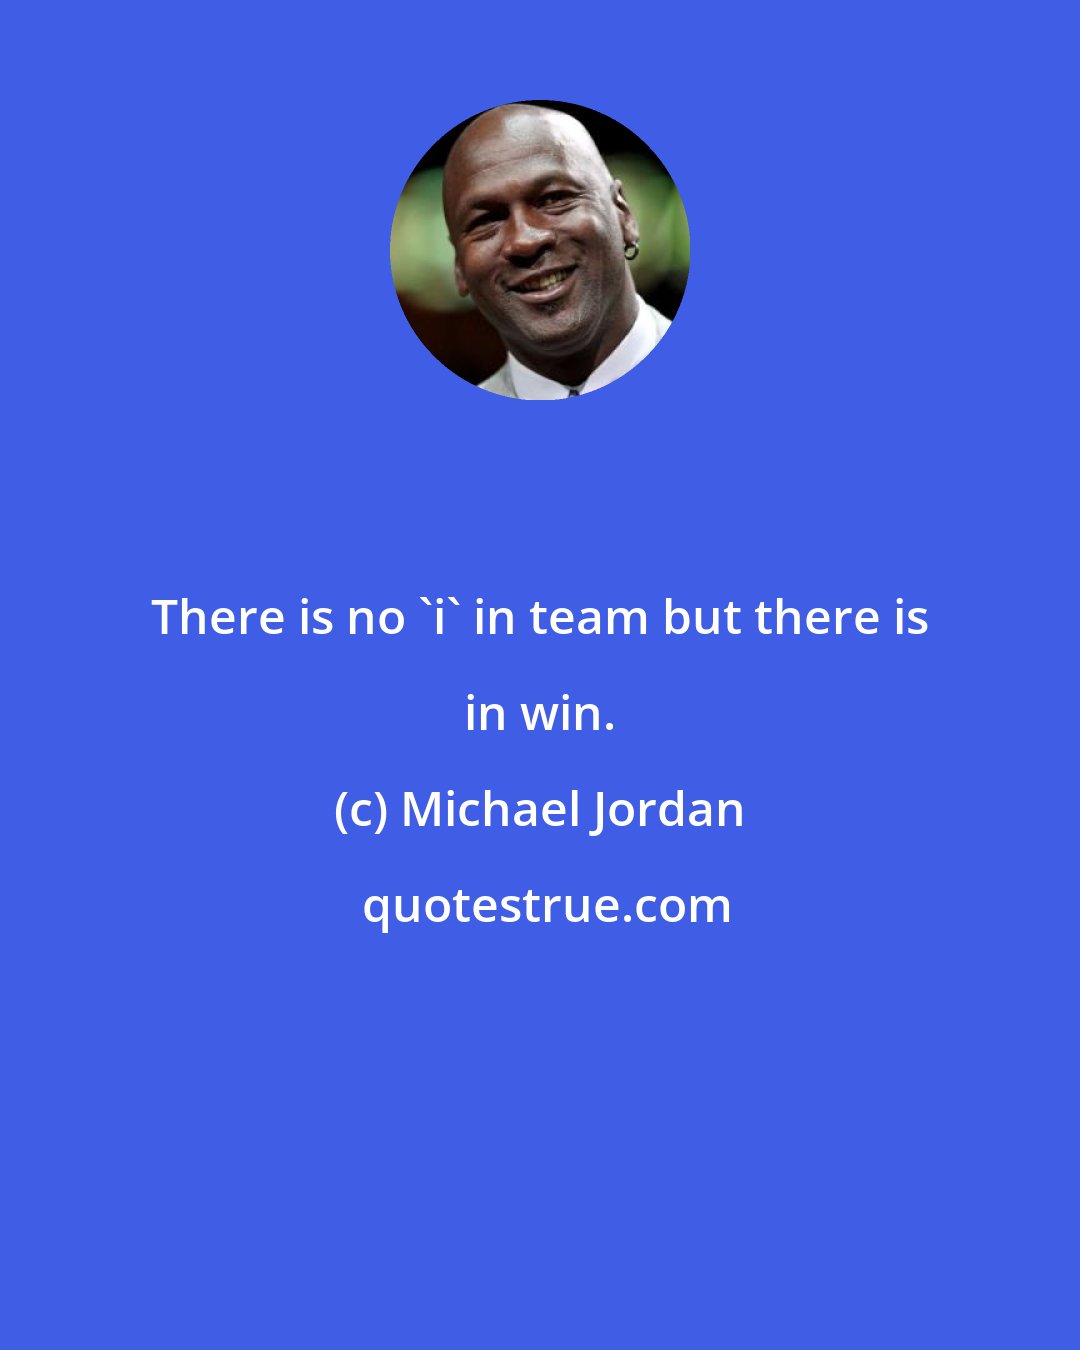 Michael Jordan: There is no 'i' in team but there is in win.